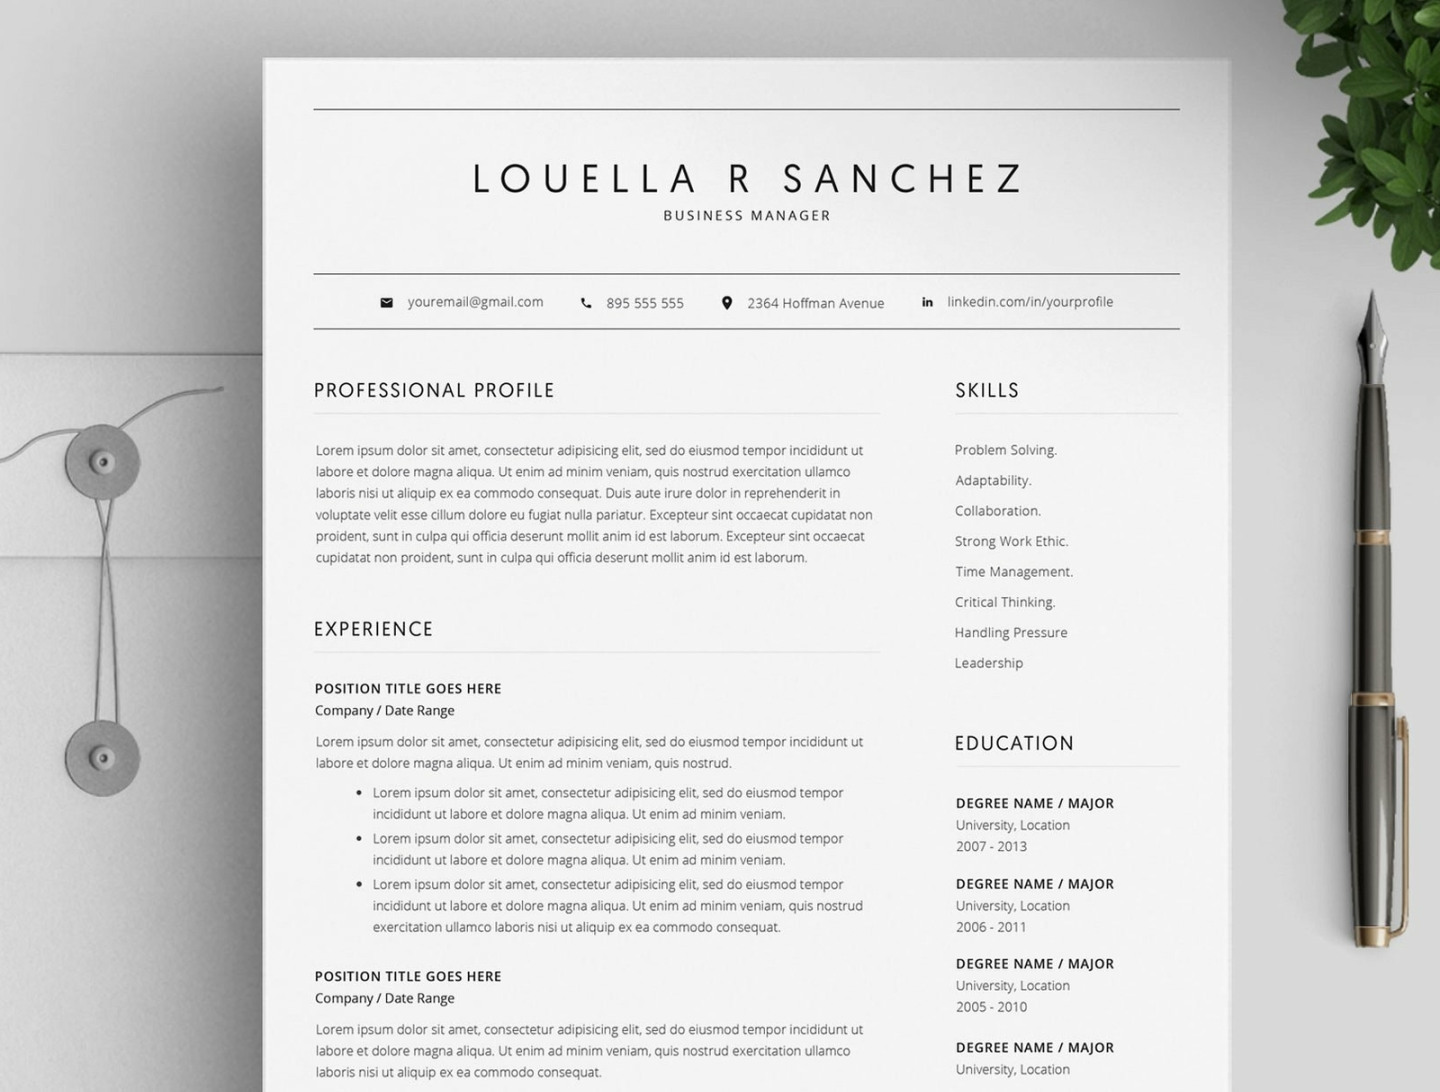 Resume Template Word & Mac Pages CV by Resume Templates on Dribbble